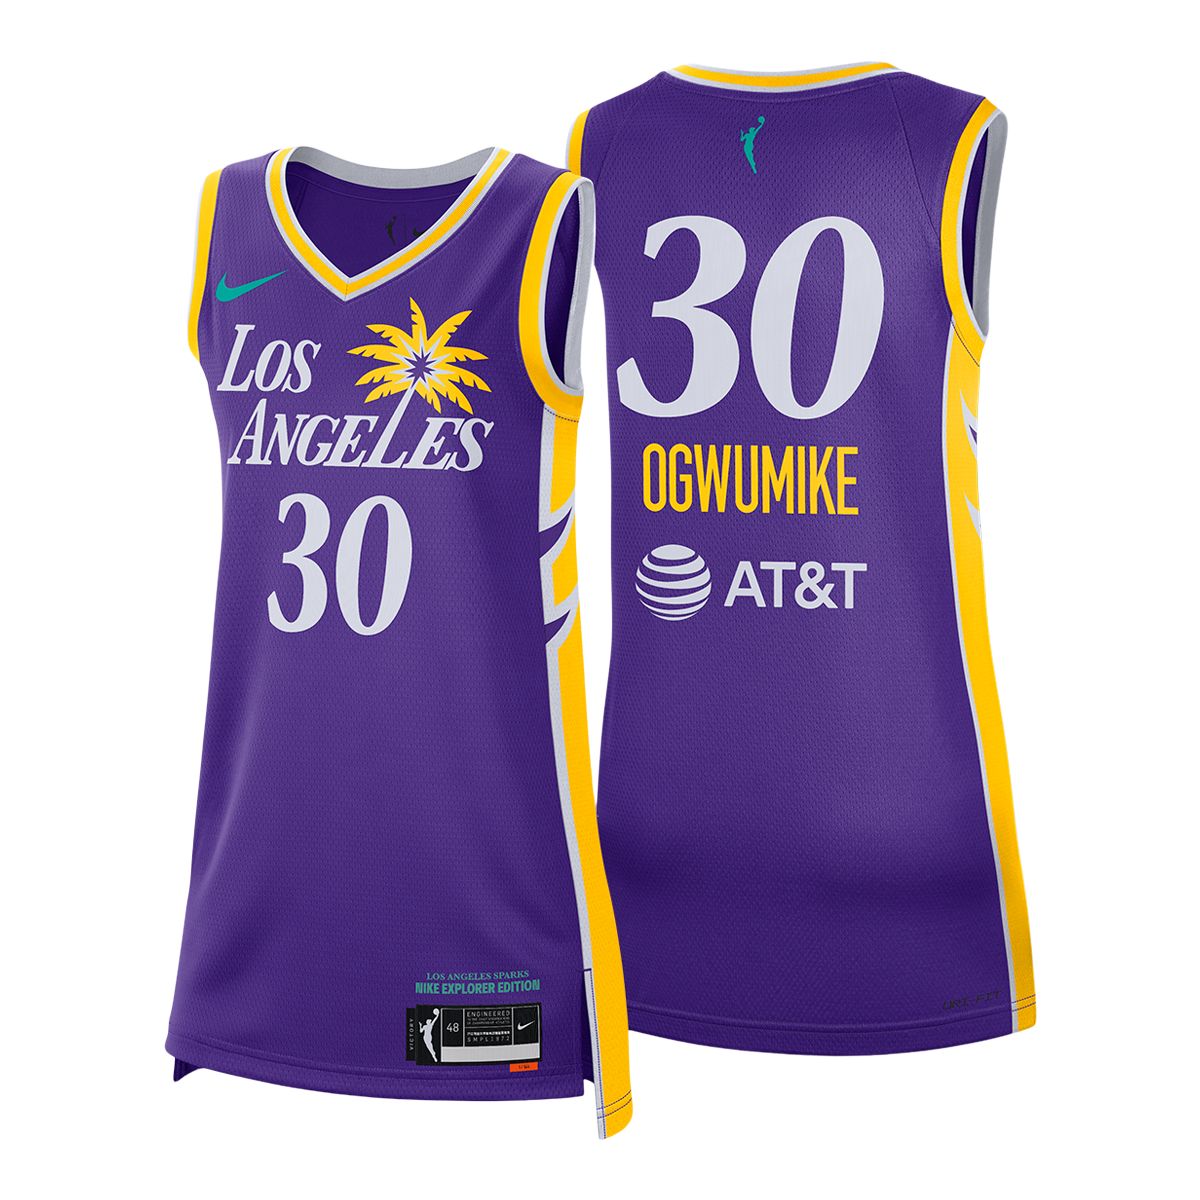 NIKE Los Angeles Sparks Nike Women's Victory Basketball Jersey